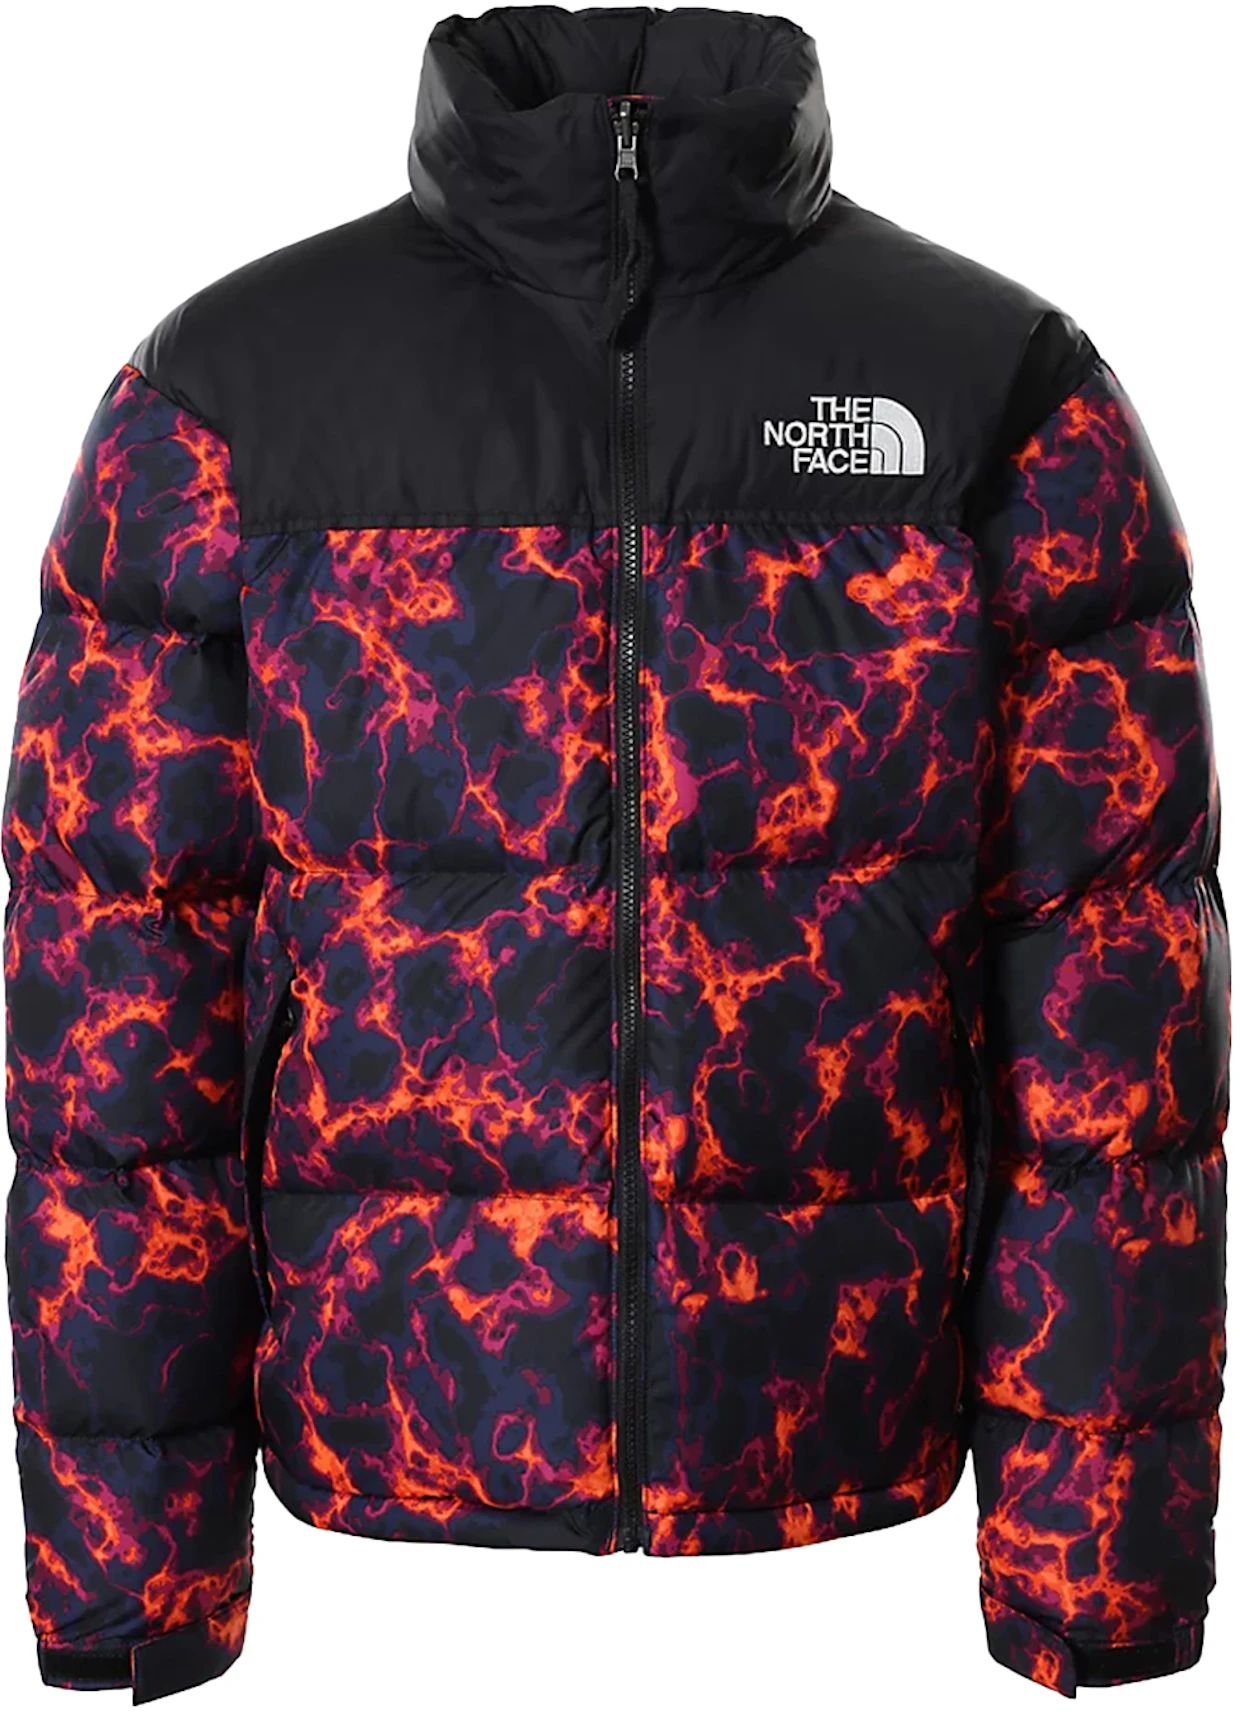 The North Face Jackets, Shirts and - StockX